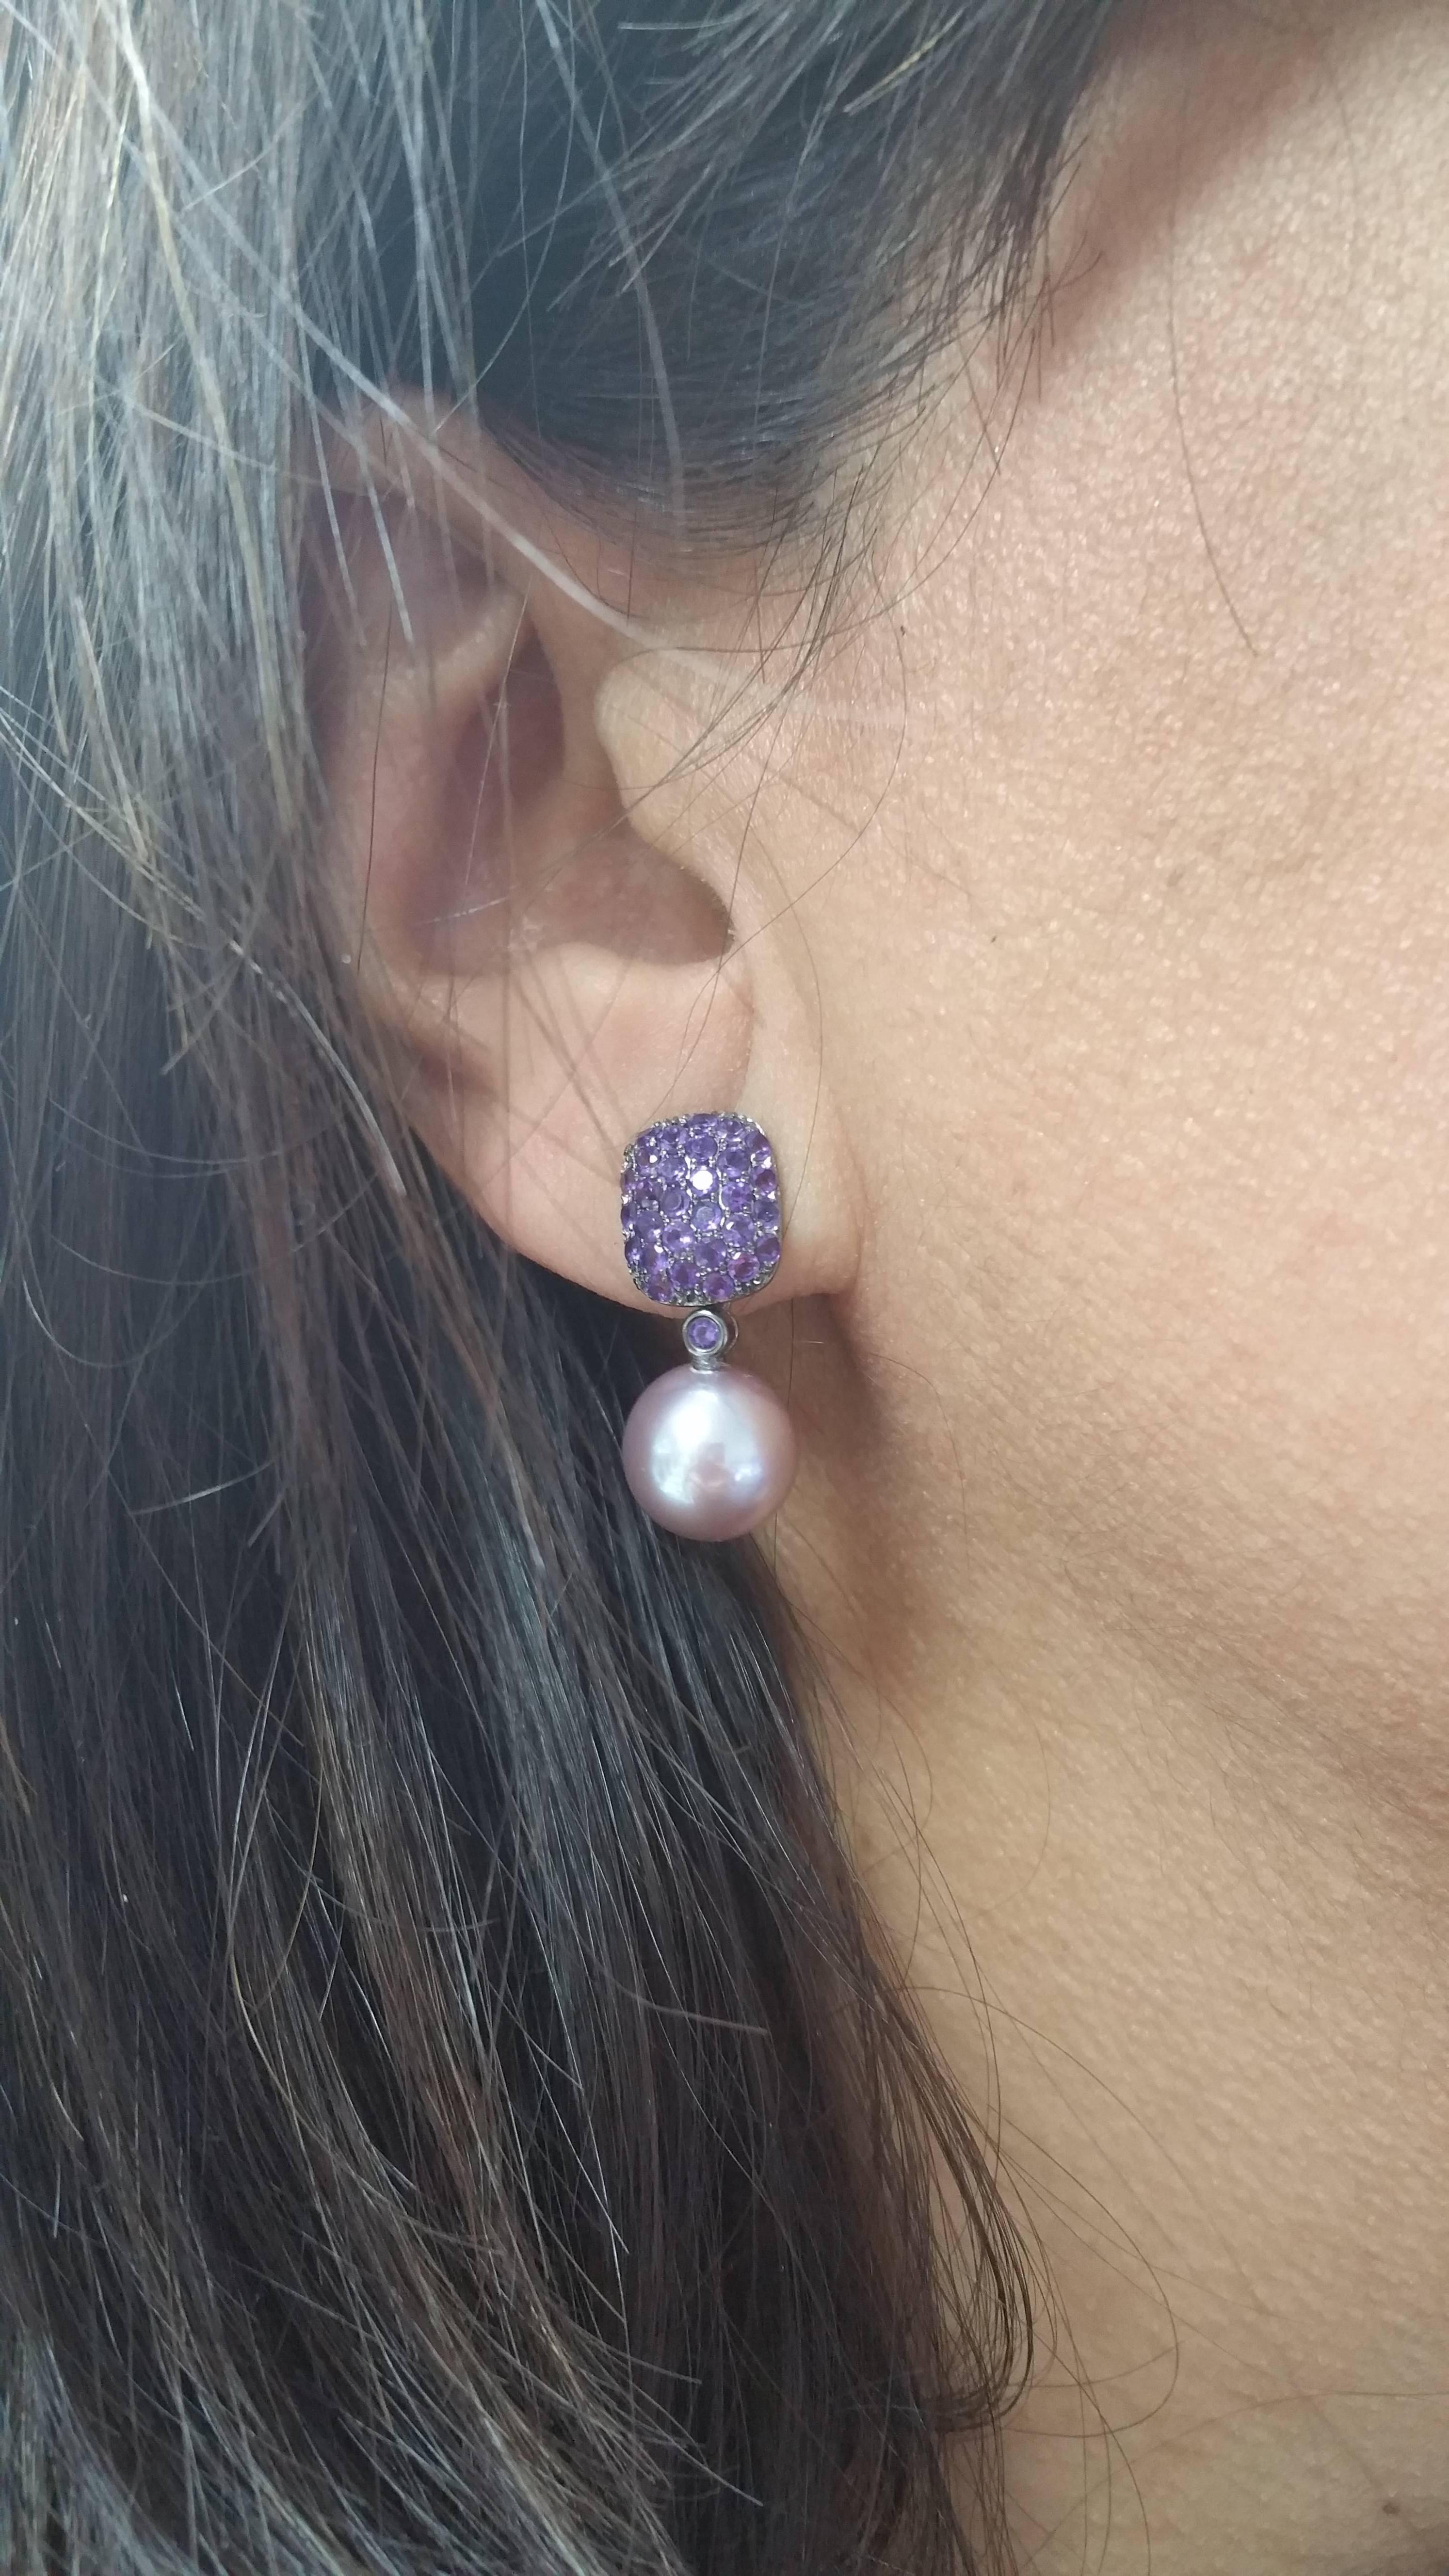 18KB Freshwater Pearl 10-11 mm
Amethyst 1.45 Carats
3.6 G.
The Freshwater pearl can be removed and the earrings can be used as studs